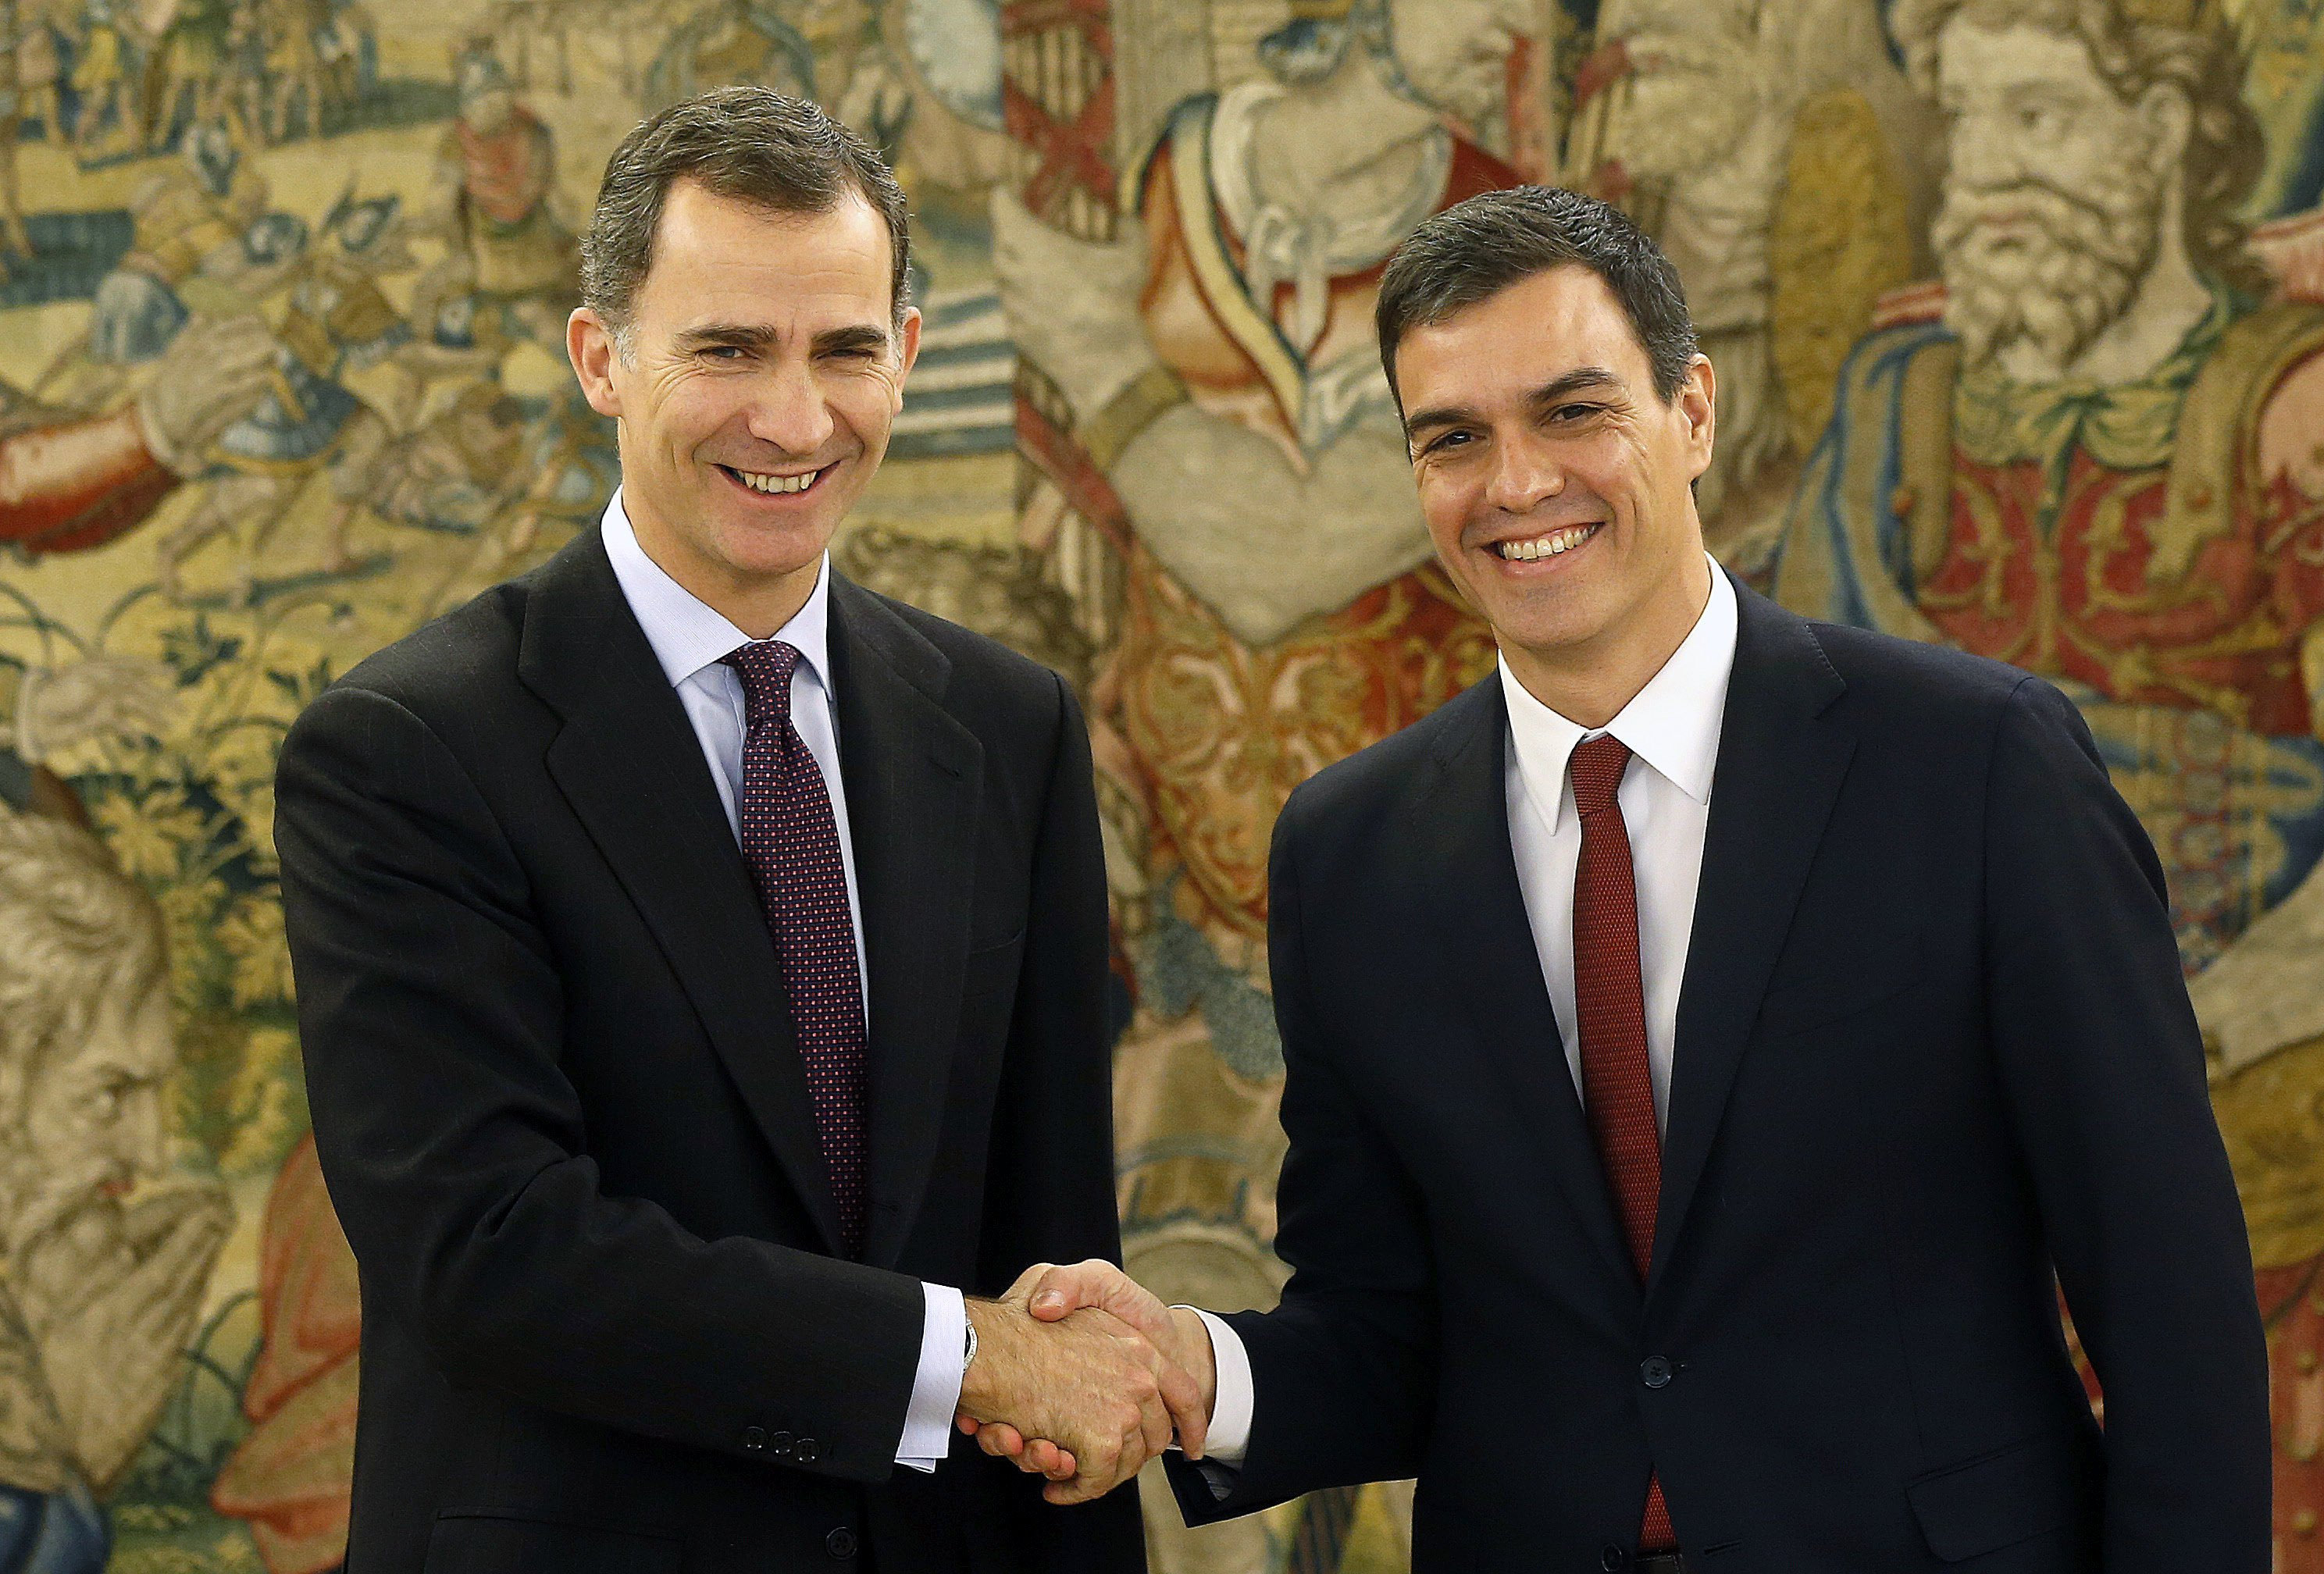 Spain's King, Philip VI and PSOE's leader, Pedro Sánchez agreed to start trying to form a new government in Spain (by ACN)